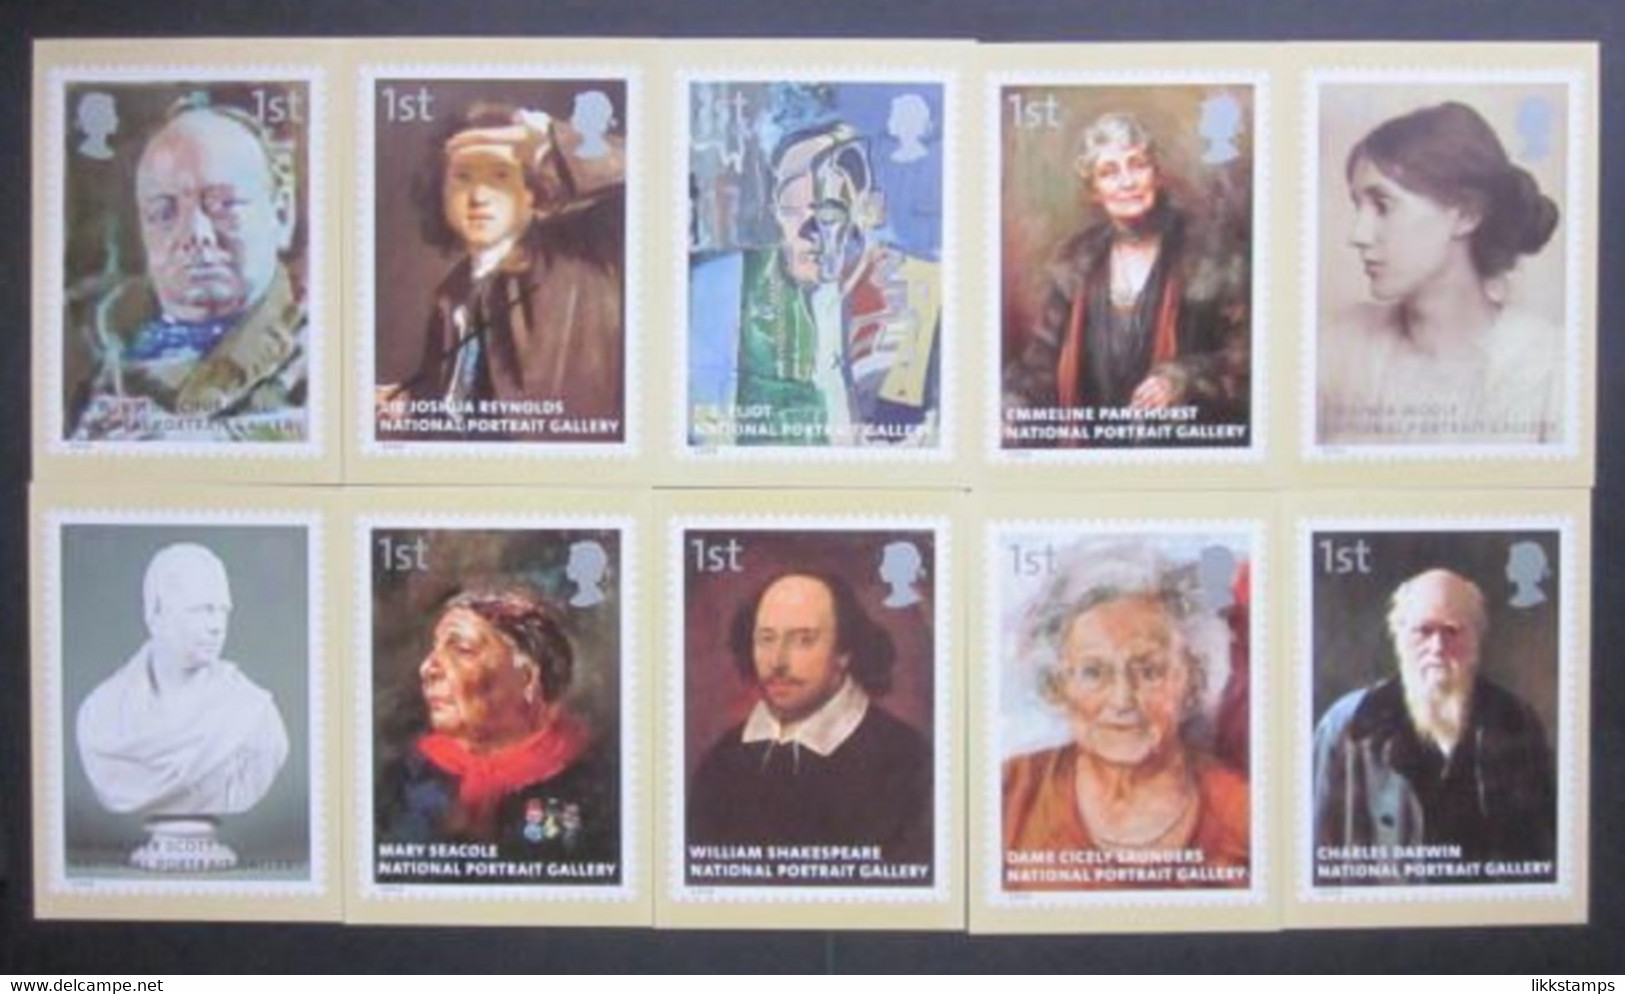 2006 THE NATIONAL PORTRAIT GALLERY, LONDON P.H.Q. CARDS UNUSED, ISSUE No. 289 (D) #00783 - PHQ Cards